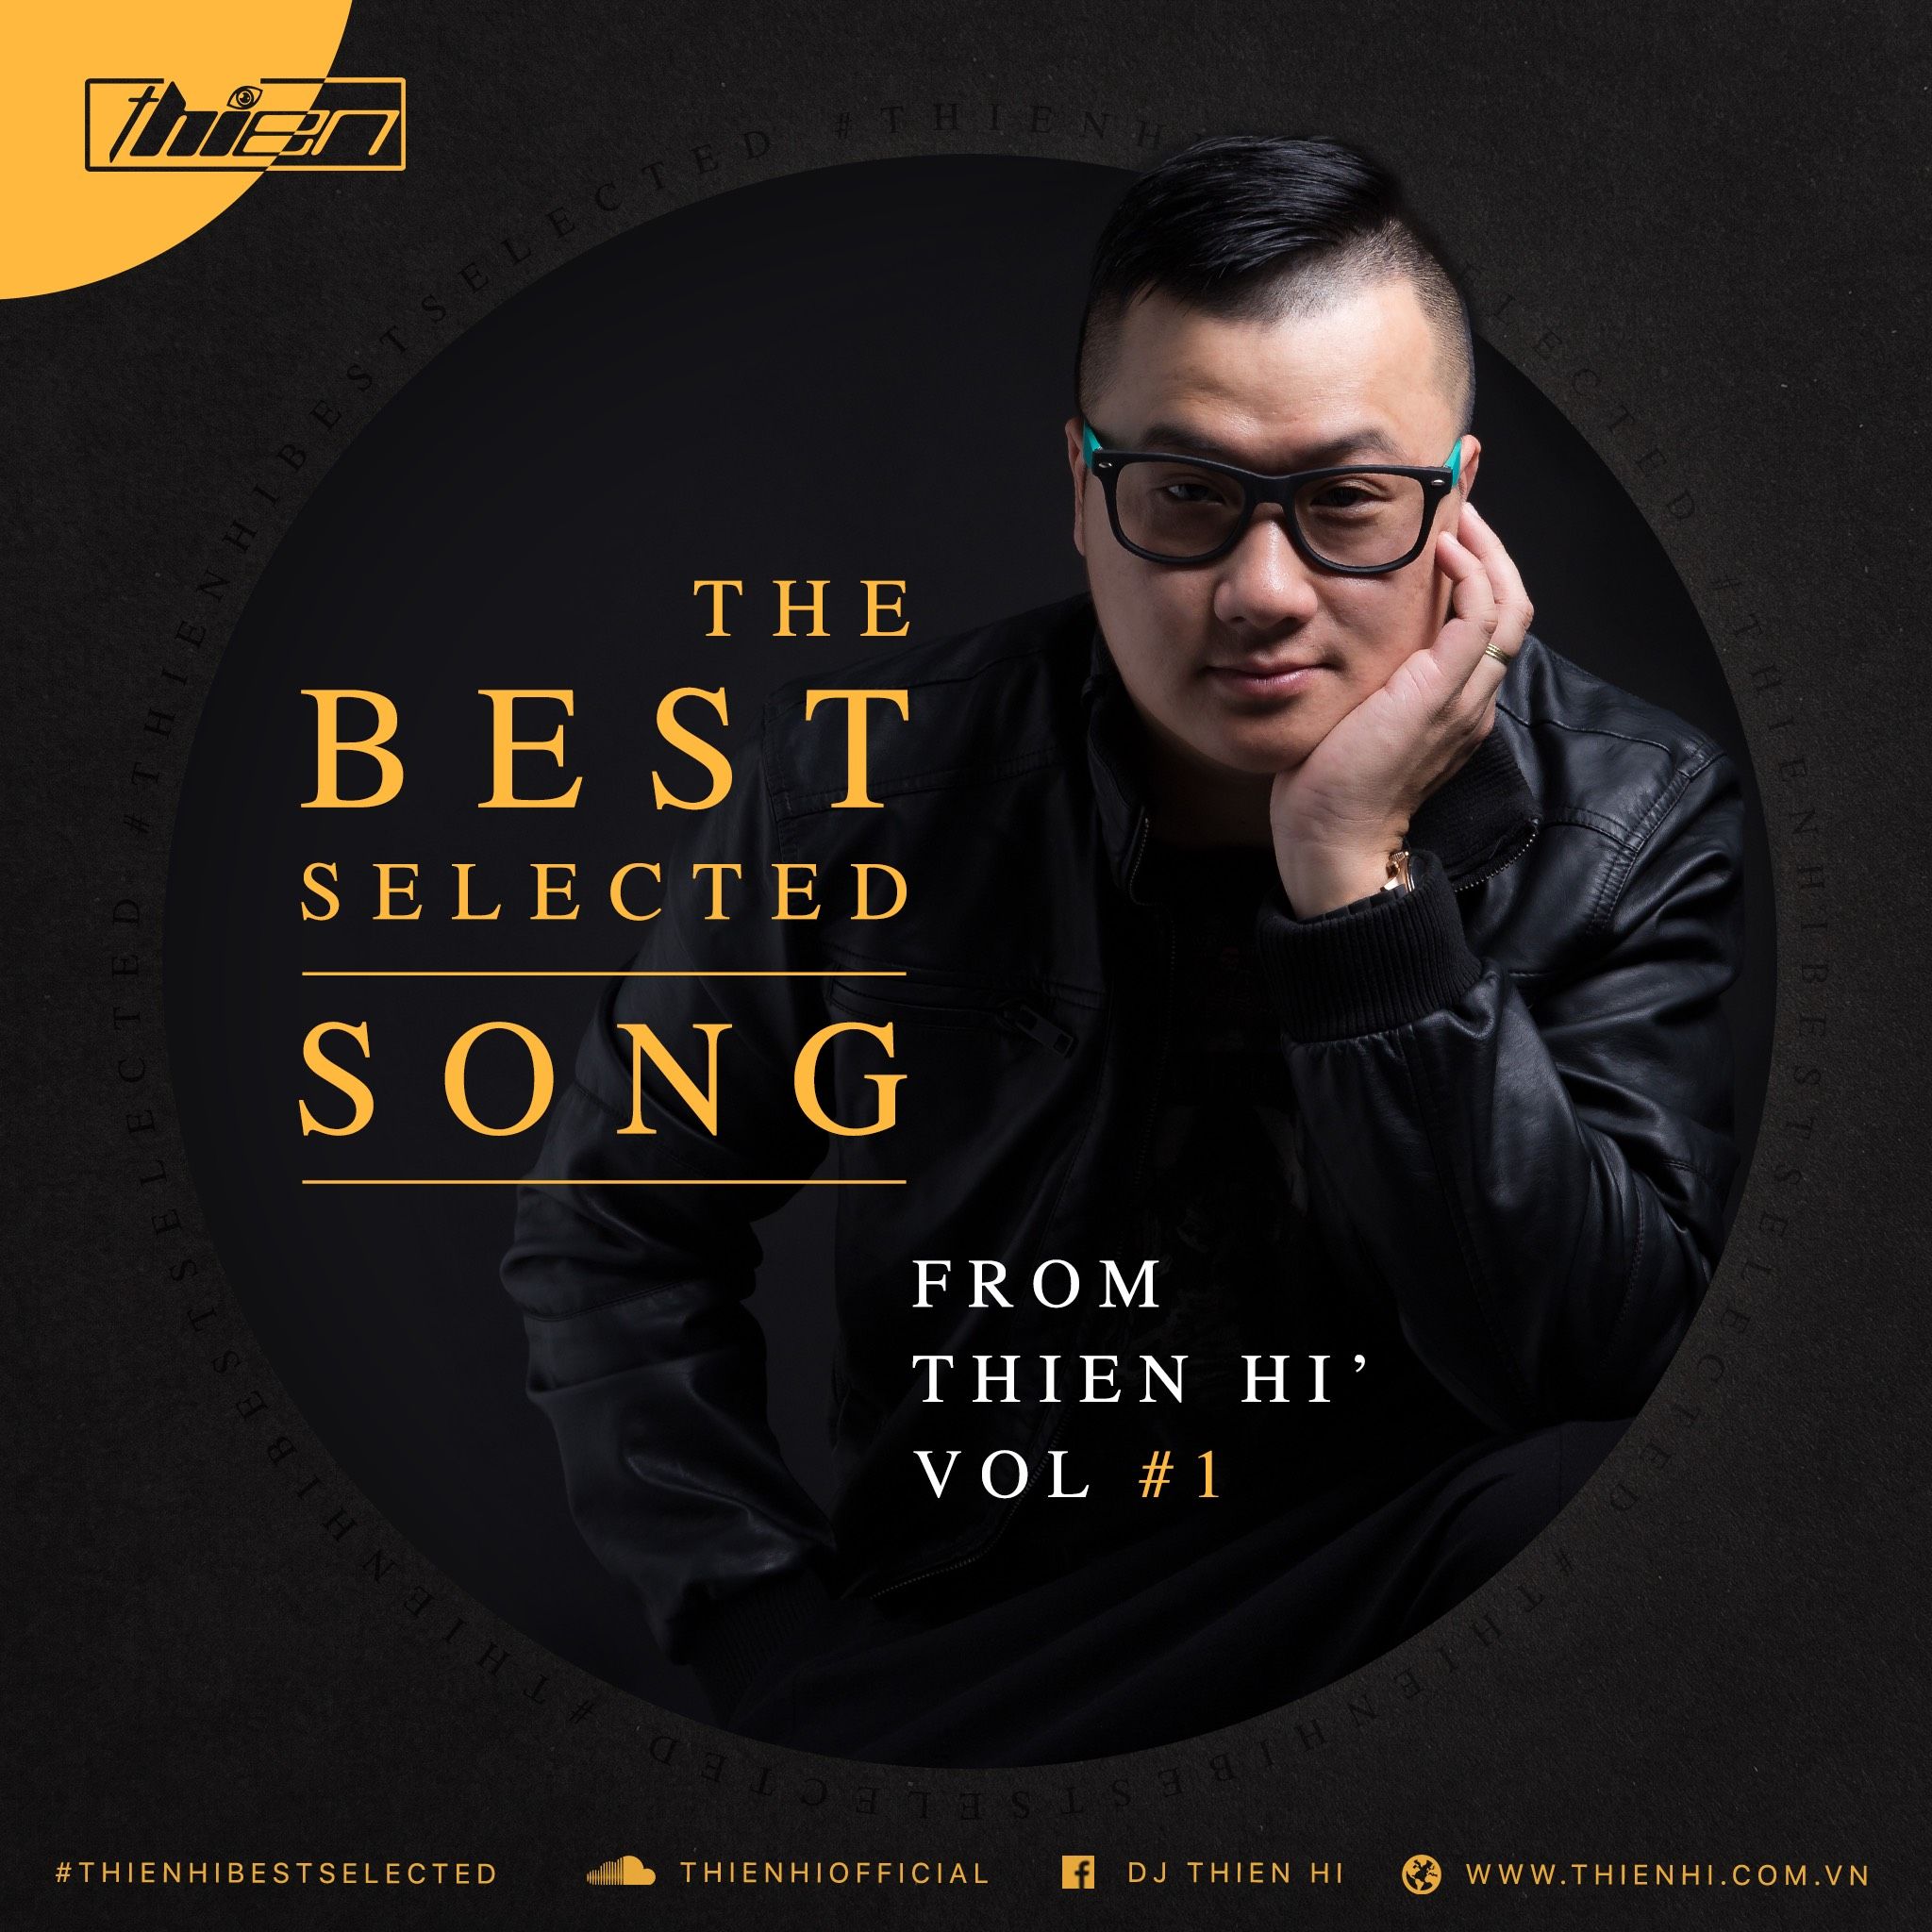 Hent Thien Hi - The Best Selected Song #1